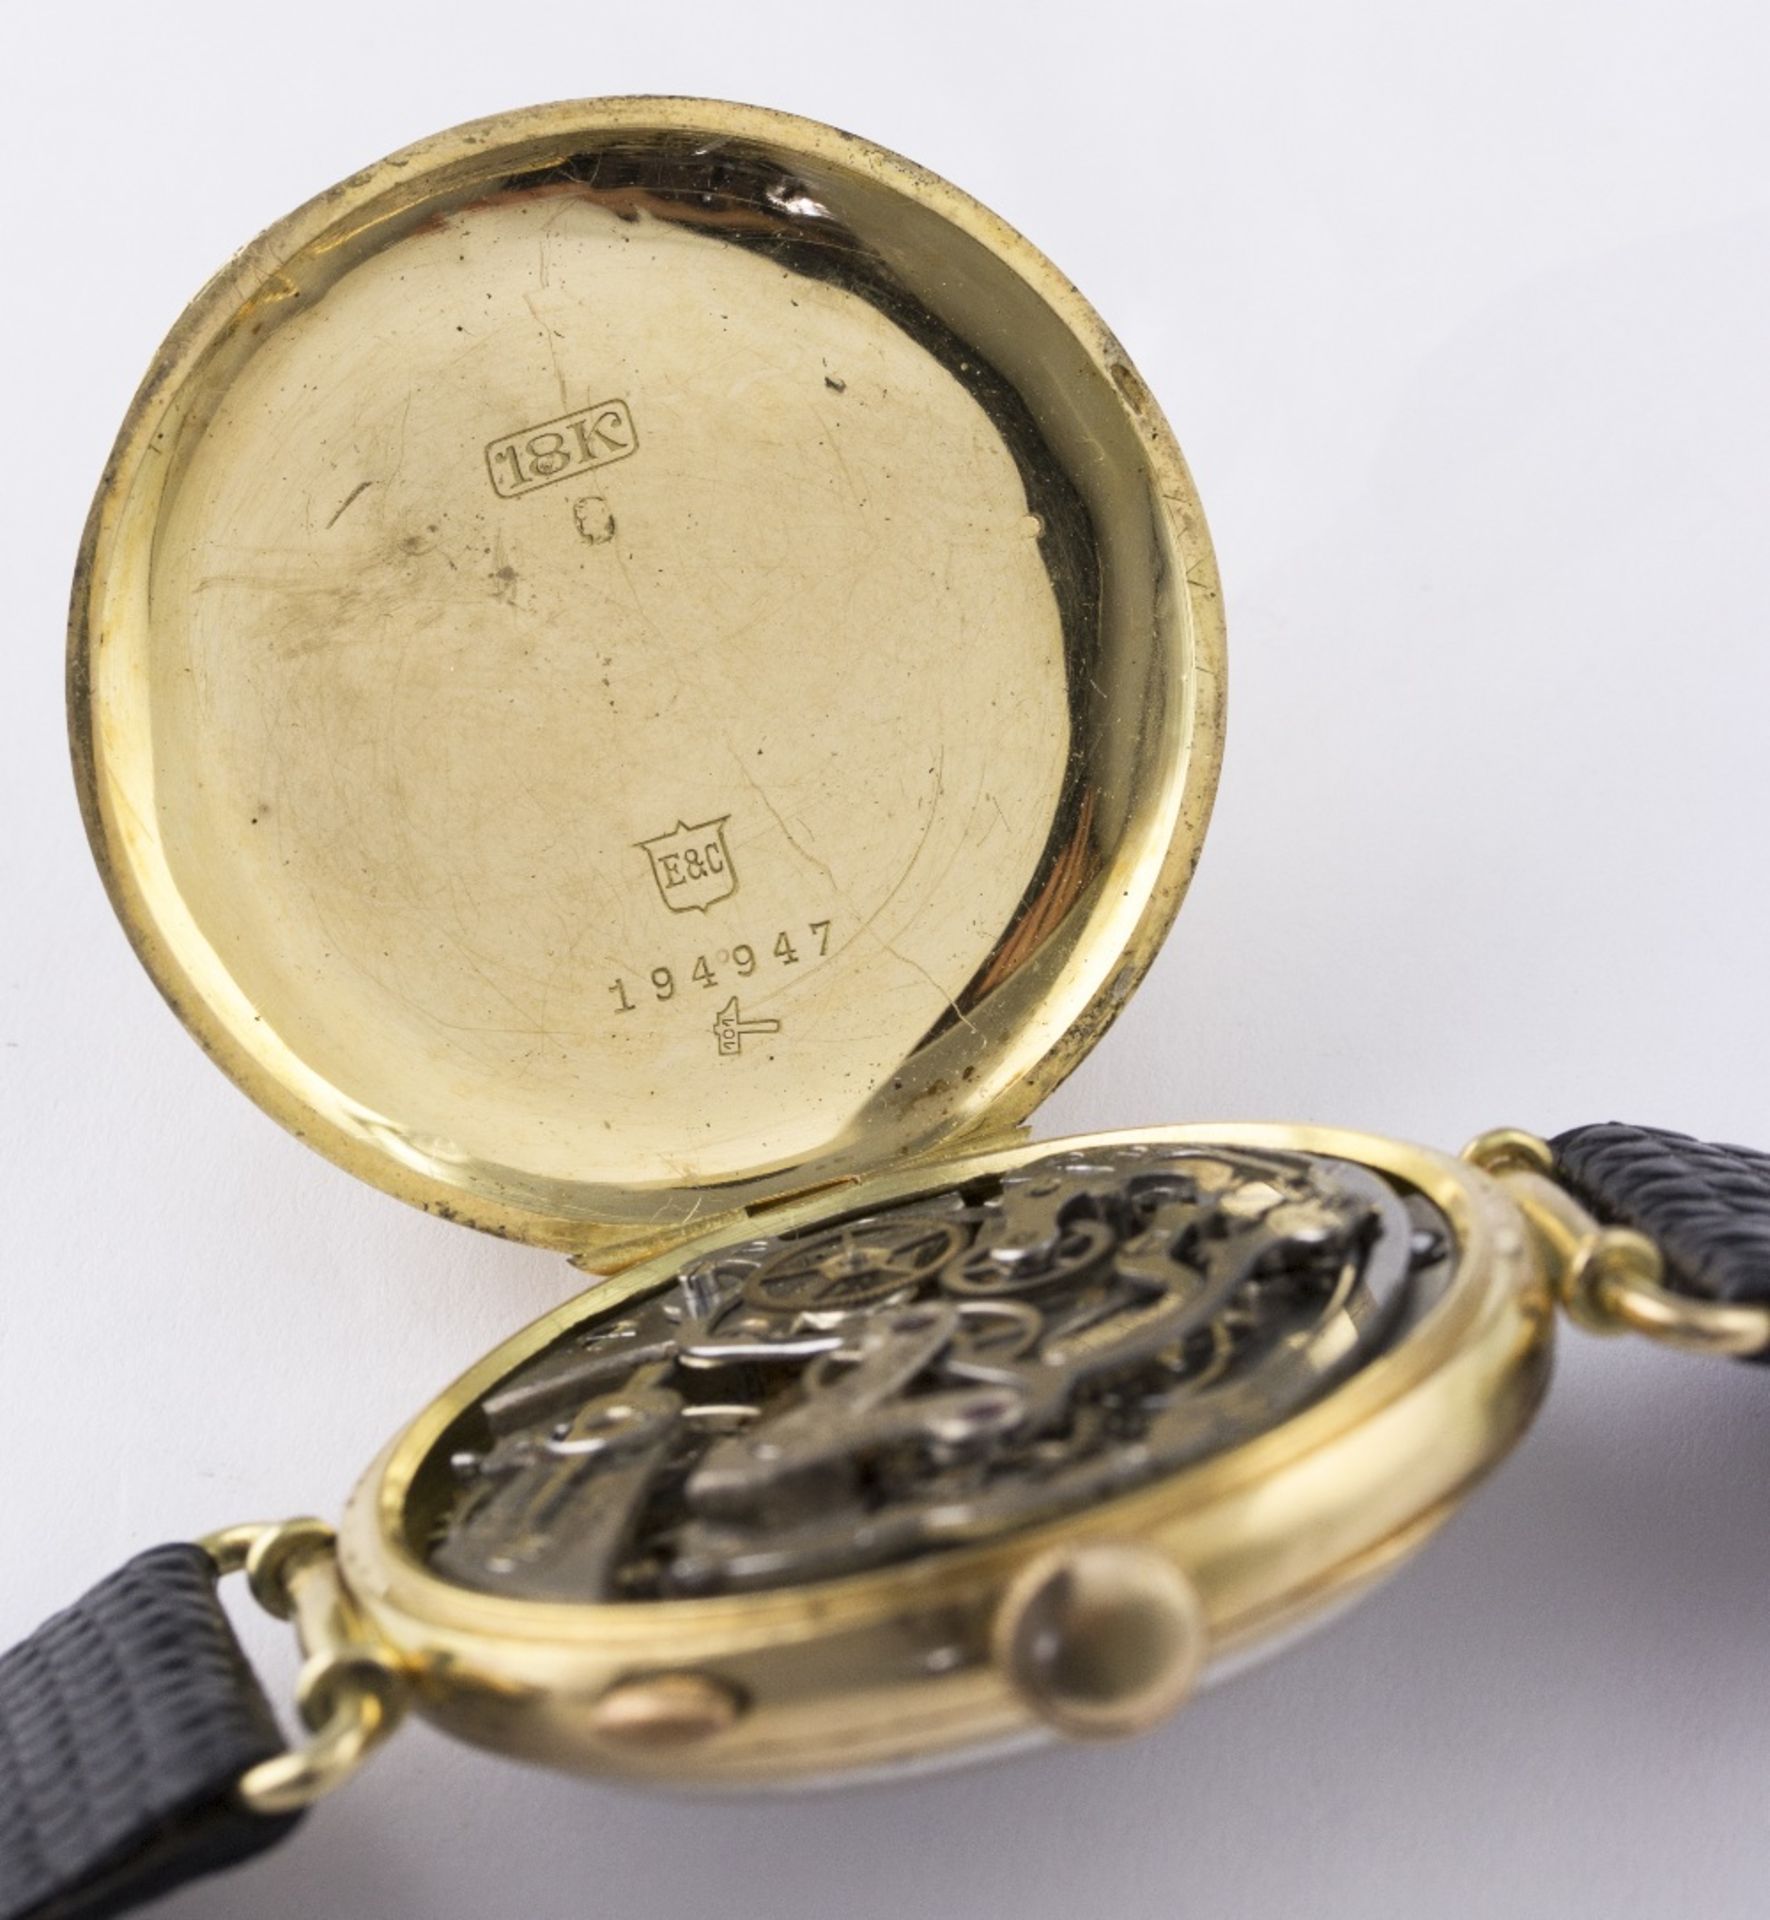 A GENTLEMAN'S 18K SOLID GOLD EBERHARD & CO SINGLE BUTTON CHRONOGRAPH WRIST WATCH CIRCA 1930s D: - Image 8 of 8